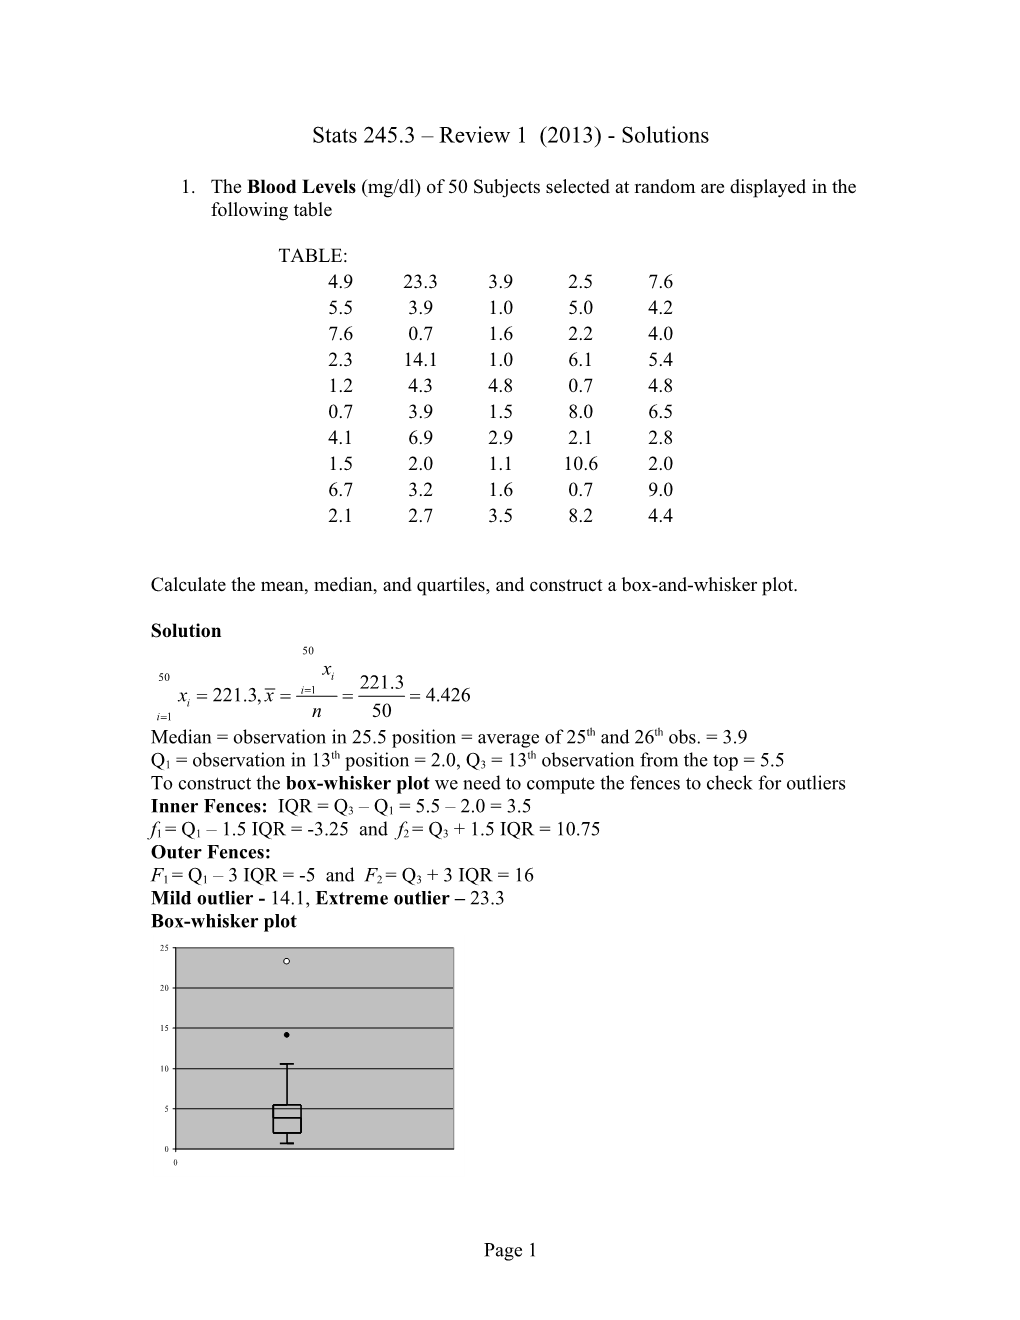 Stats 245.3 Review 1 (2013) - Solutions